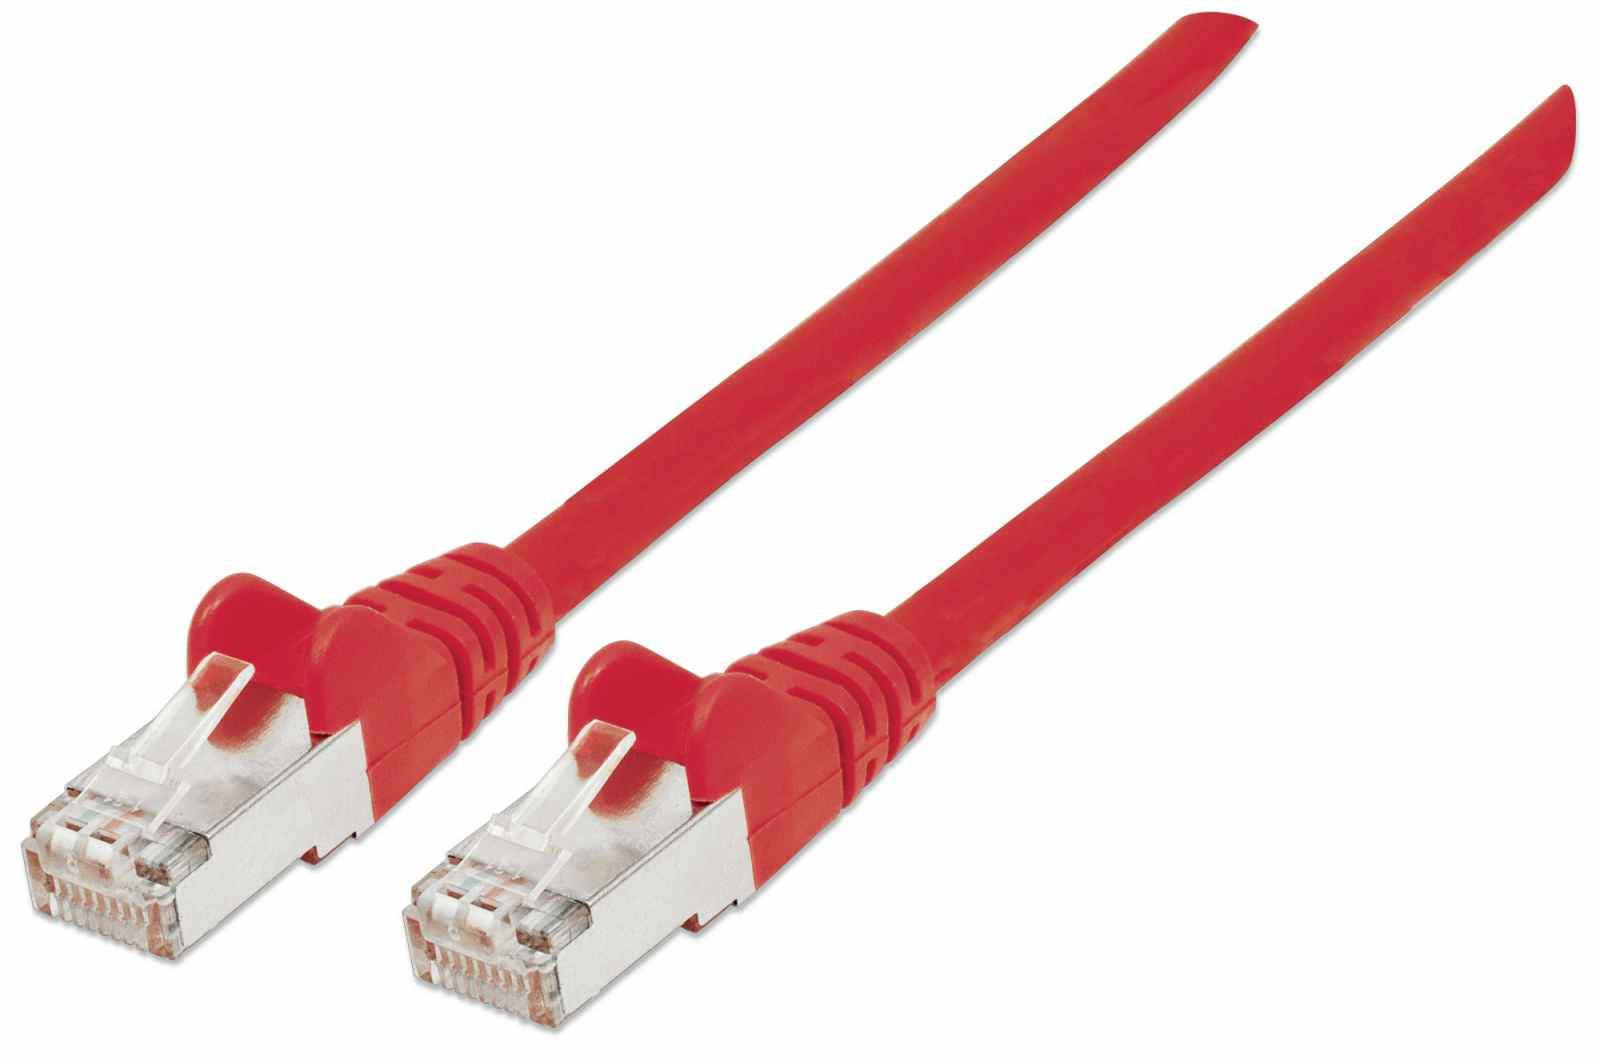 Intellinet Network Patch Cable, Cat7 Cable/Cat6A Plugs, 0.5m, Red, Copper, S/FTP, LSOH / LSZH, PVC, RJ45, Gold Plated Contacts, Snagless, Booted, Lifetime Warranty, Polybag